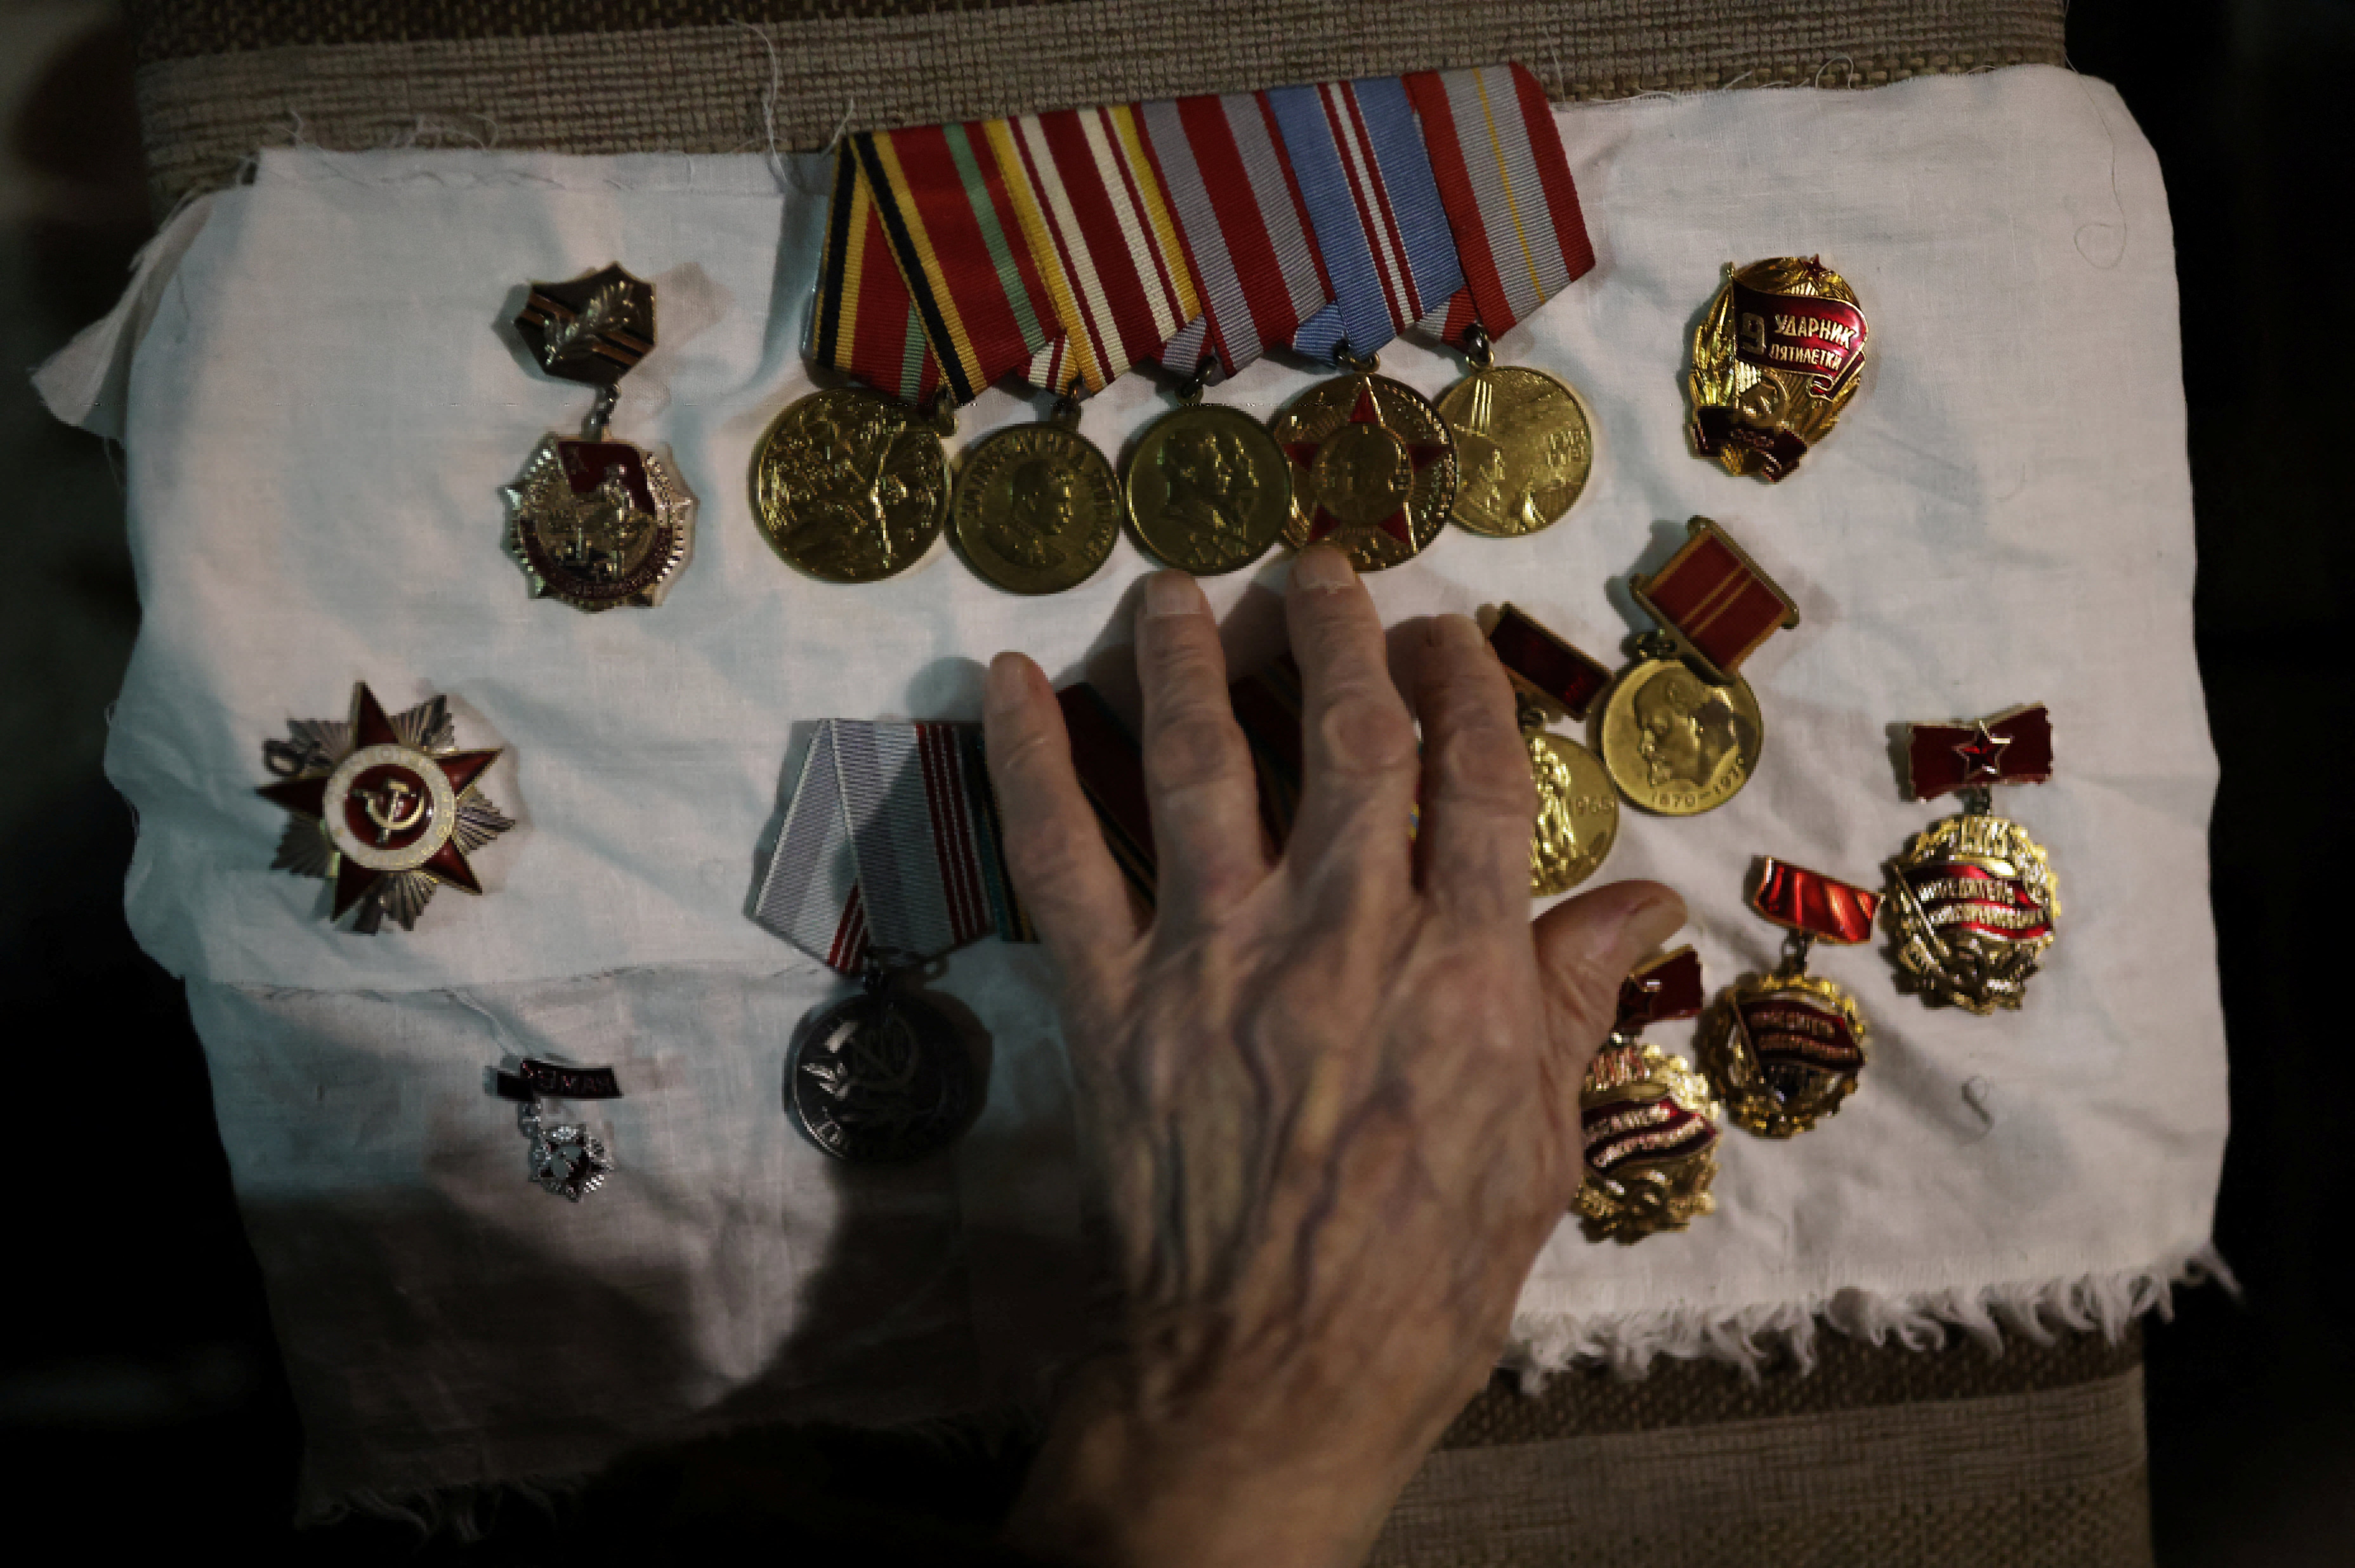 Maria arranges the medals awarded to her late husband, Vasilii Emelianovich